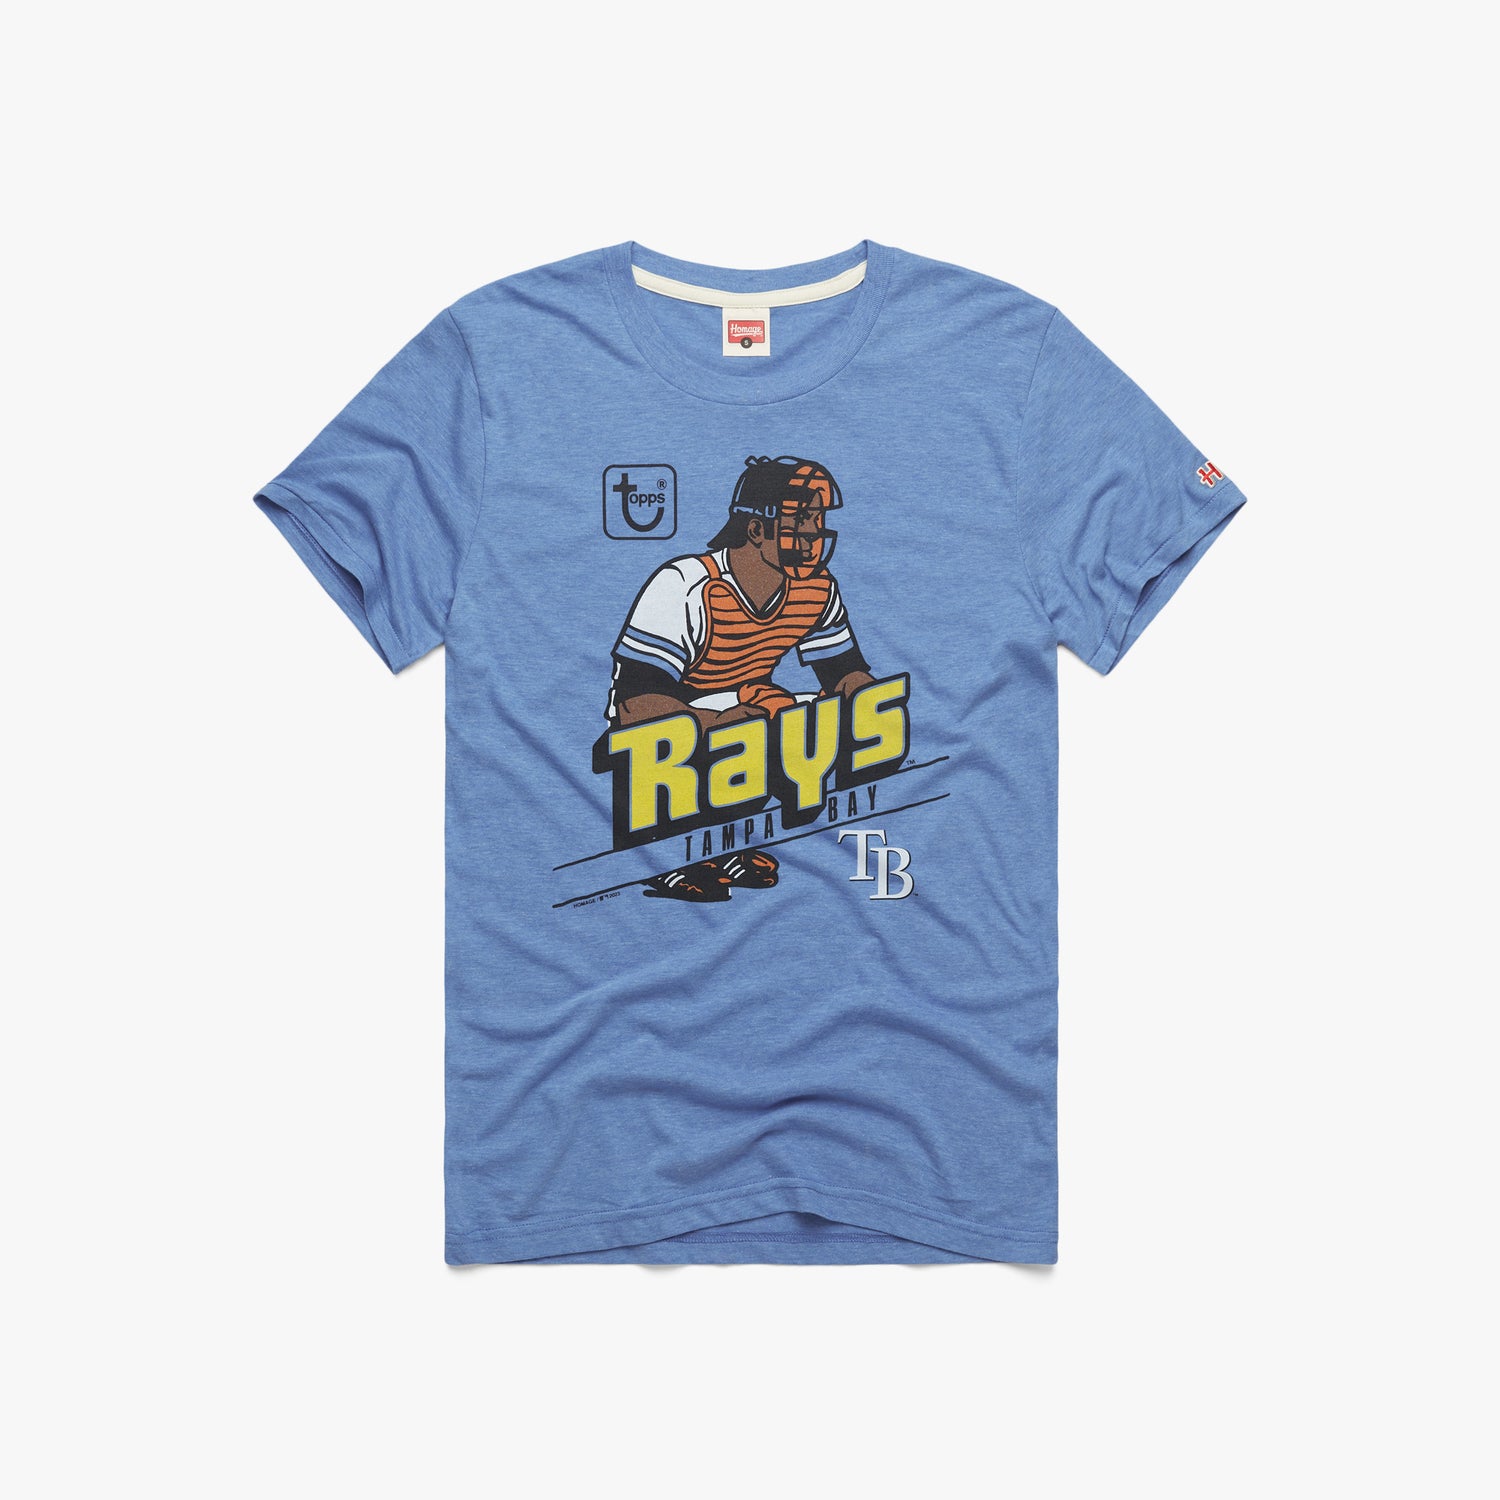 MLB x Topps Tampa Bay Rays T-Shirt from Homage. | Light Blue | Vintage Apparel from Homage.